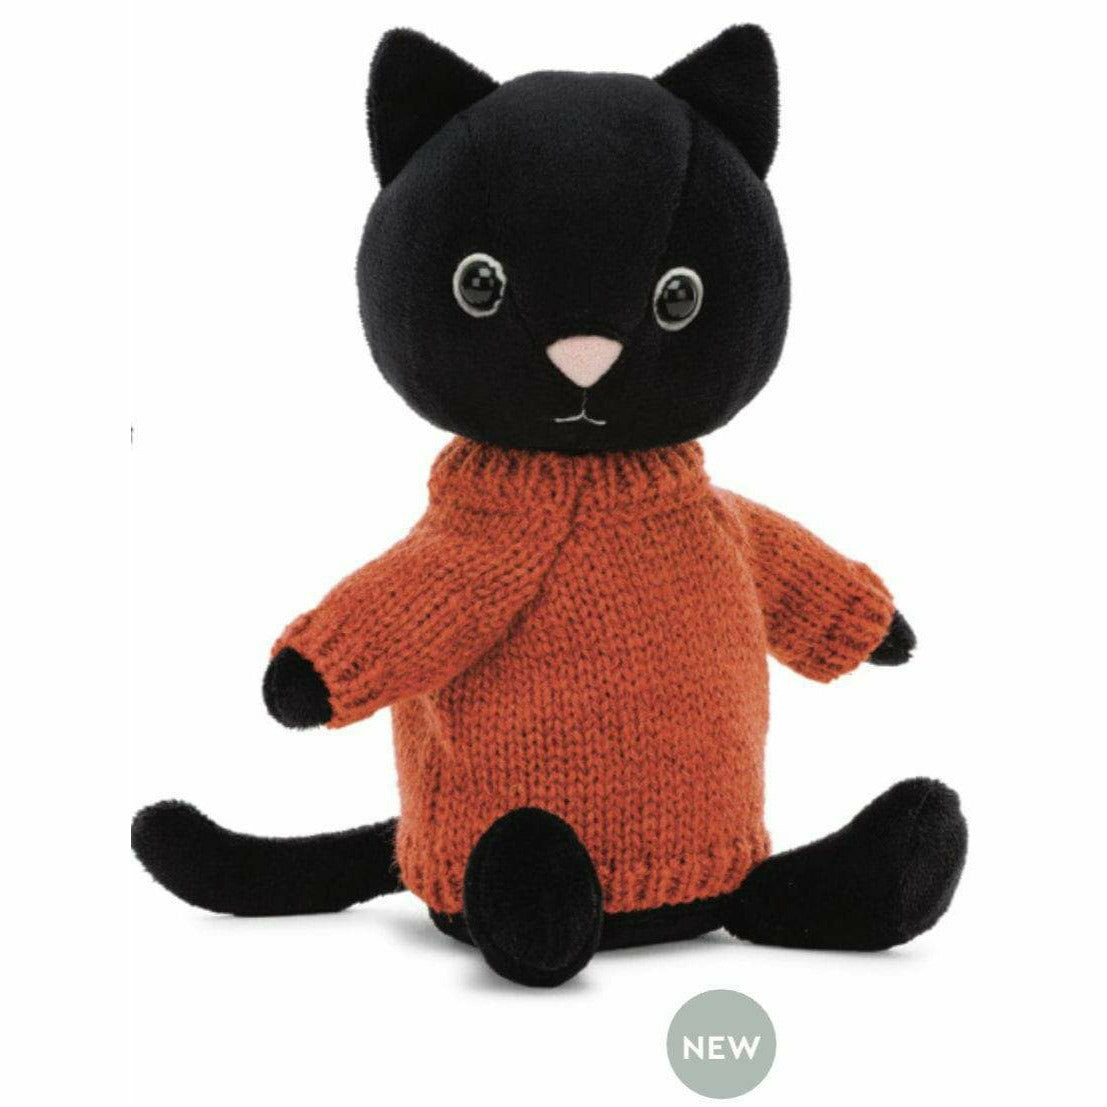 Jellycat Toys - Jellycat Toys & Animals | The Natural Baby Company